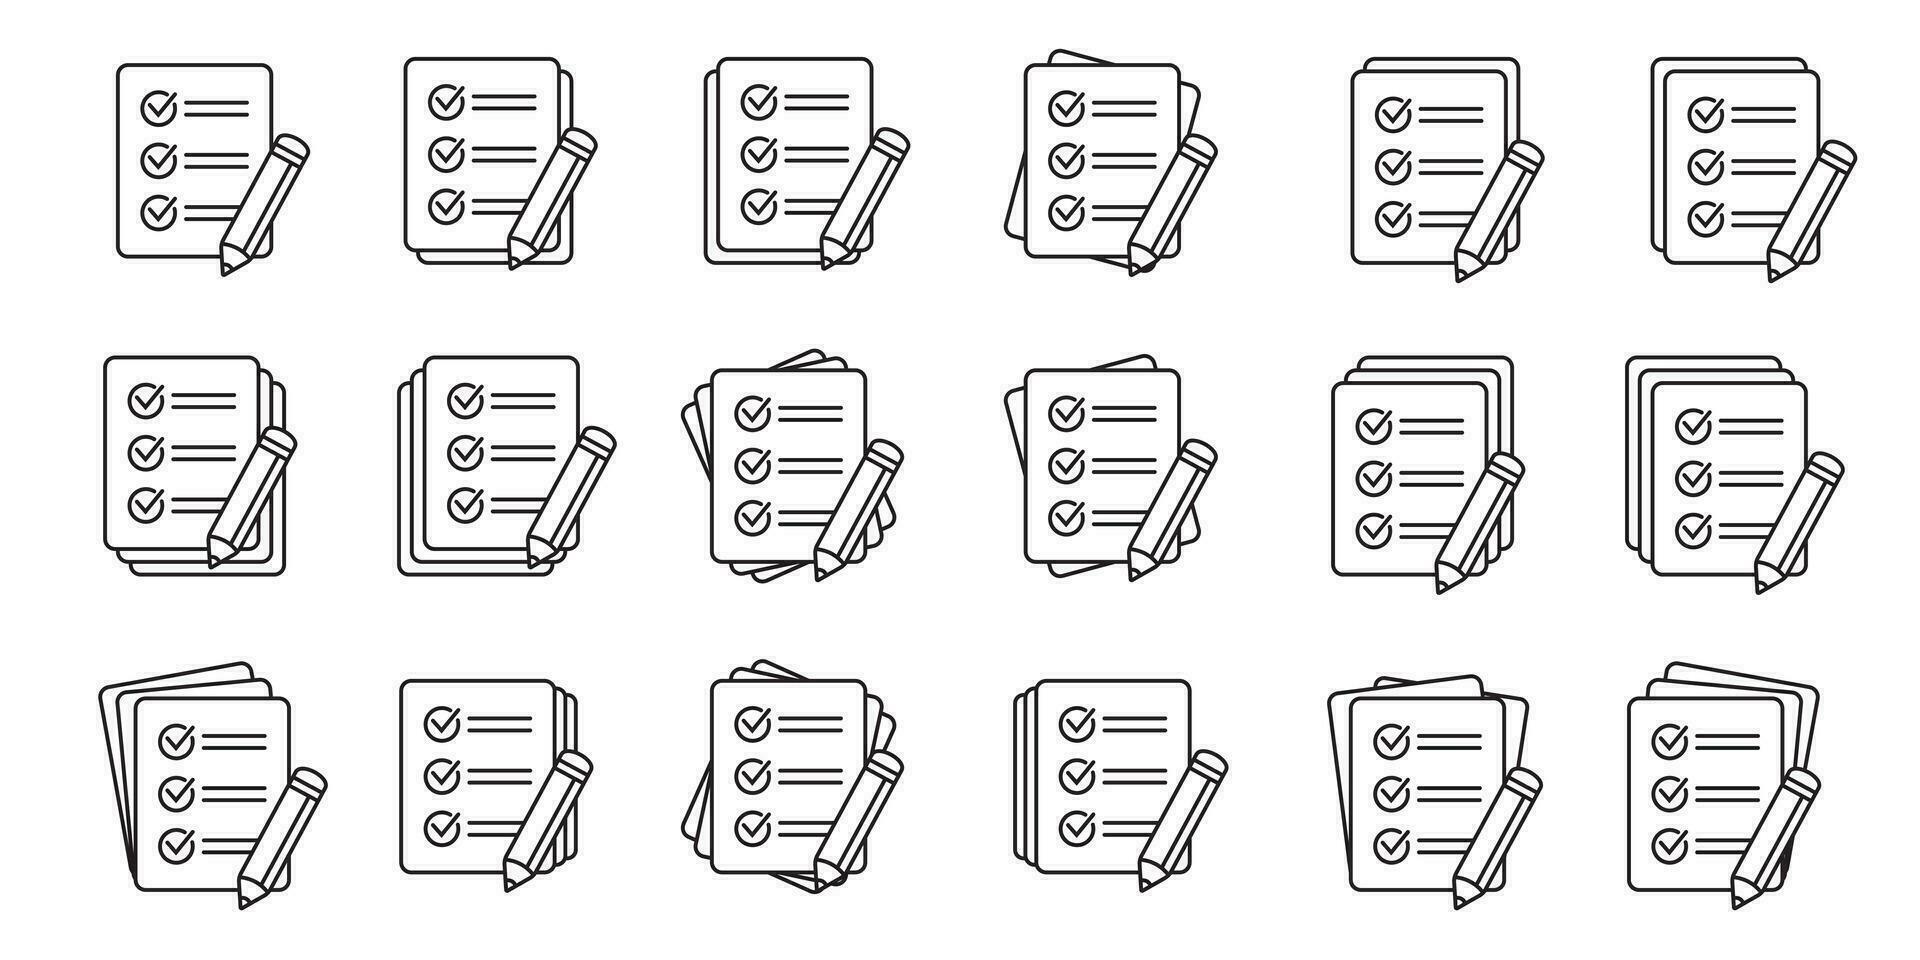 Checklist with pencil icon. Test, questionnaire icon. To do list vector icon for web site and app design.